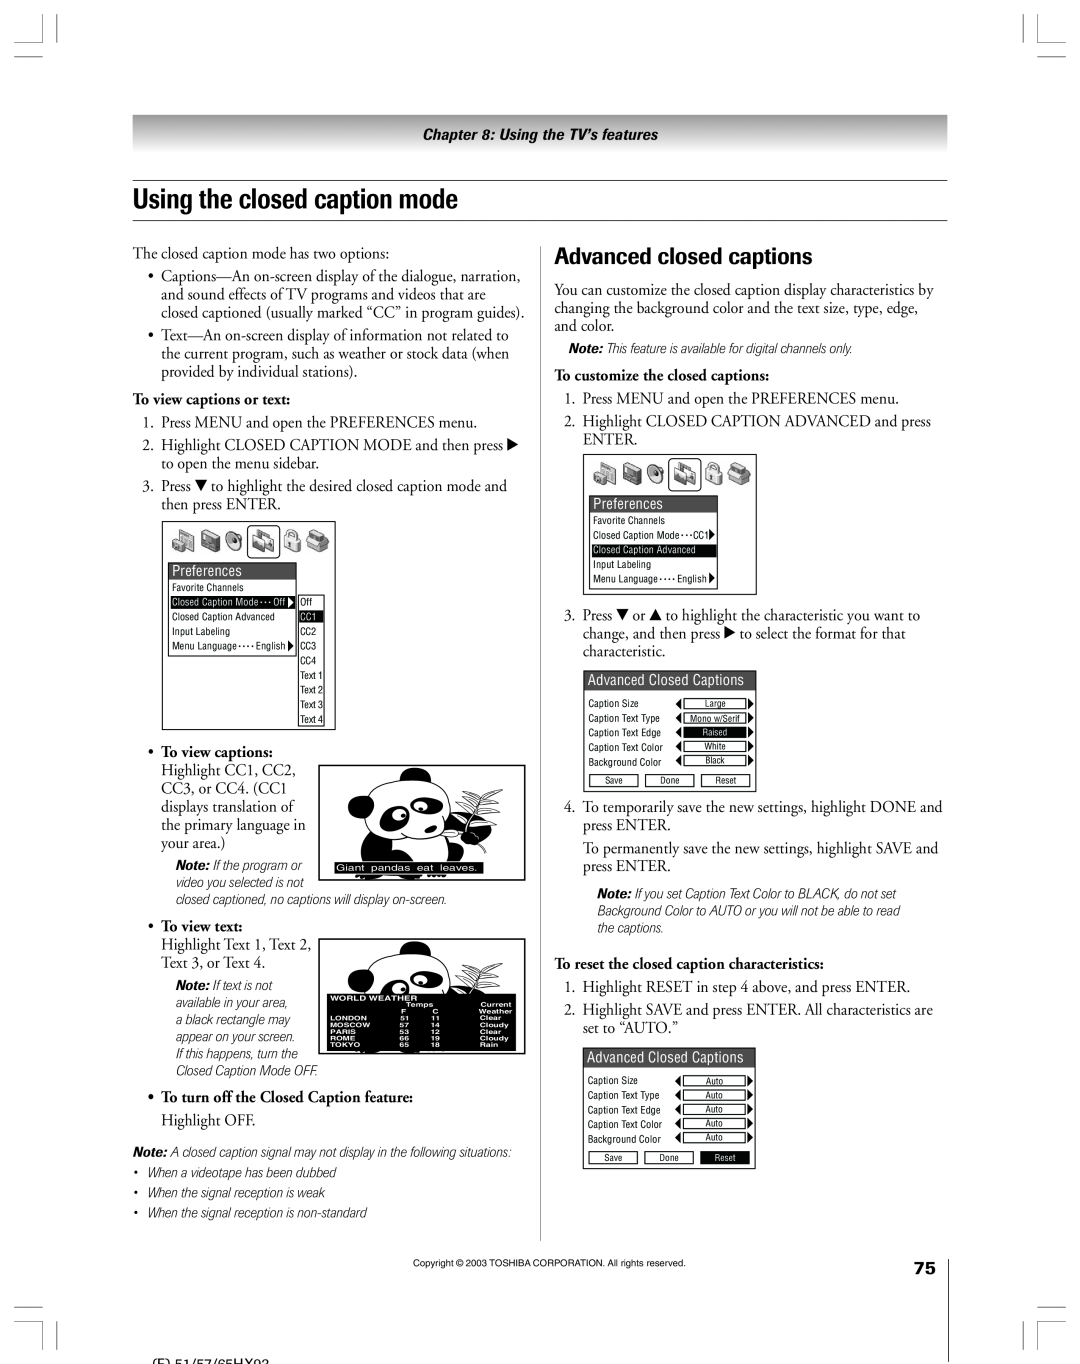 Toshiba 51HX93 owner manual Using the closed caption mode, Advanced closed captions, To view captions or text, To view text 